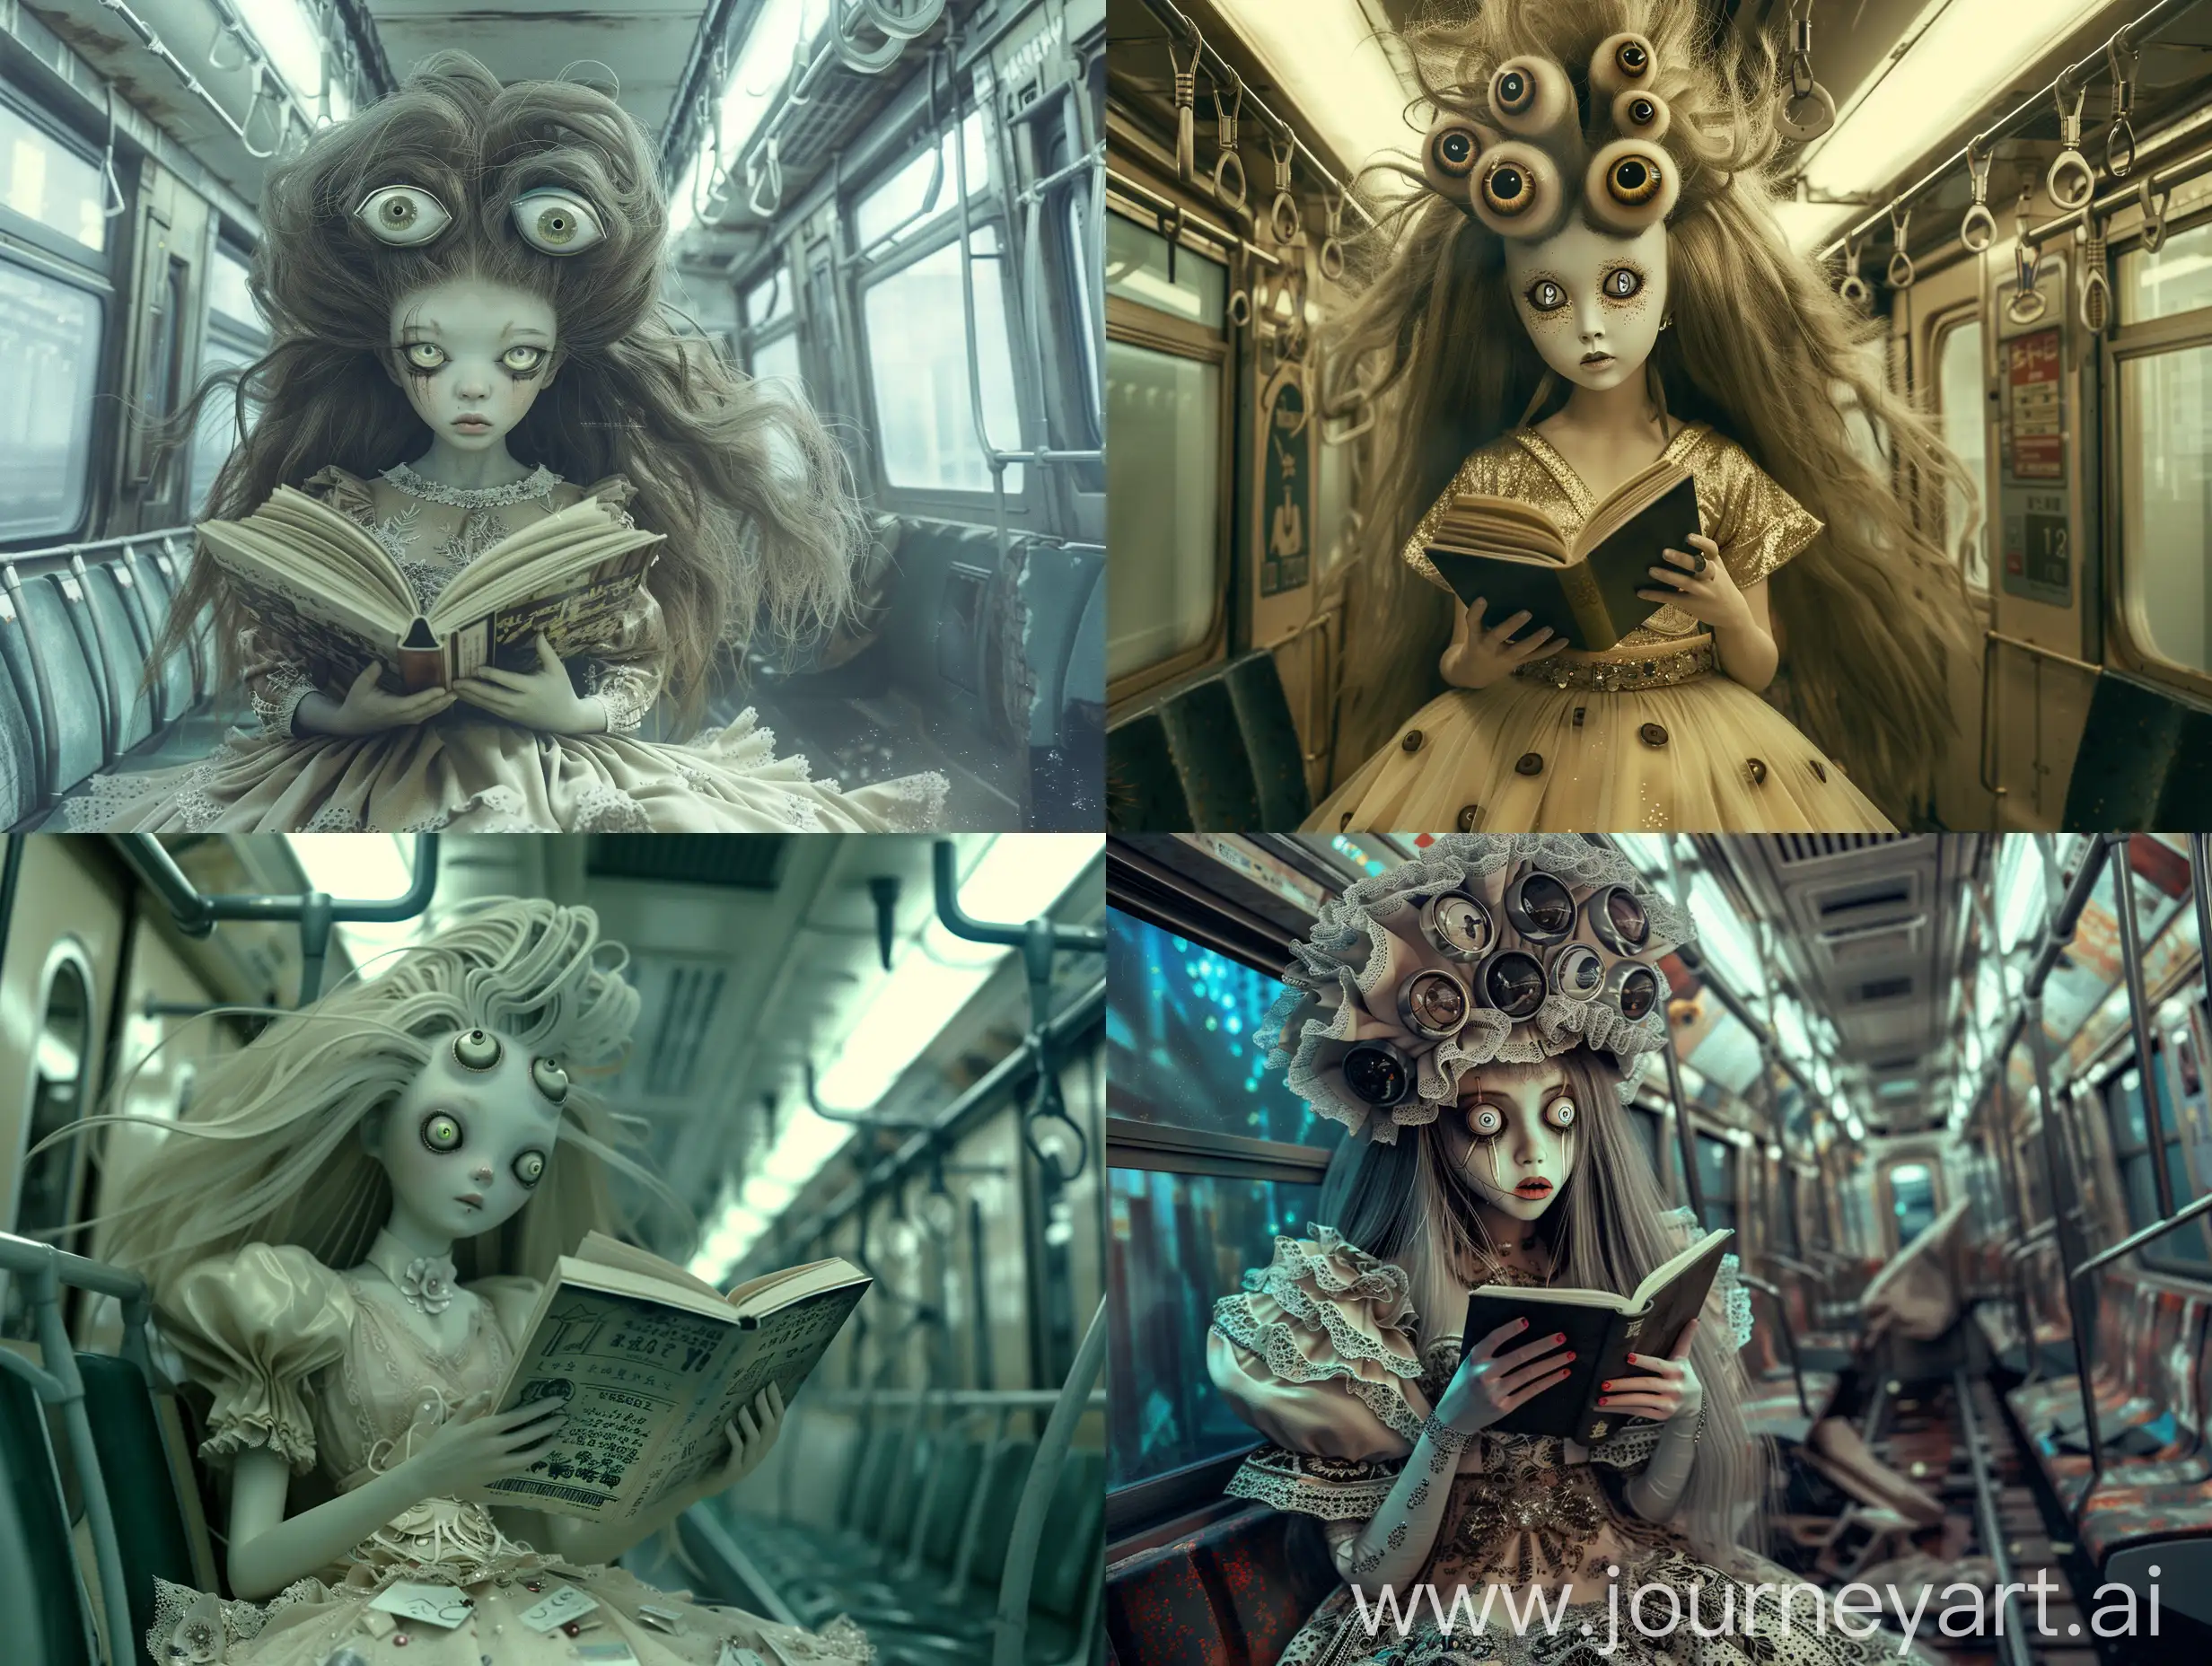 cinematic, realism, Using (((imagination))) to craft a photorealistic representation of an unusual fantasy dream, Cinematic shooting techniques and shooting angles, use midium-angle lens, top-shot. photorealistic representation of an unusual fantasy dream, Describing yokai (((A girl in a fashionable dress, elegant, with long hair, a big head, and eyes all over her face, reading a book))) Inside a Tokyo subway train late at night, Amazing, shocking, Mysterious, Contrasty, ivory colors, Memphis, The image should capture every detail of the yokai and the ruins with UHD 8K clarity, reminiscent of a cinematic scene, vivid and lifelike.